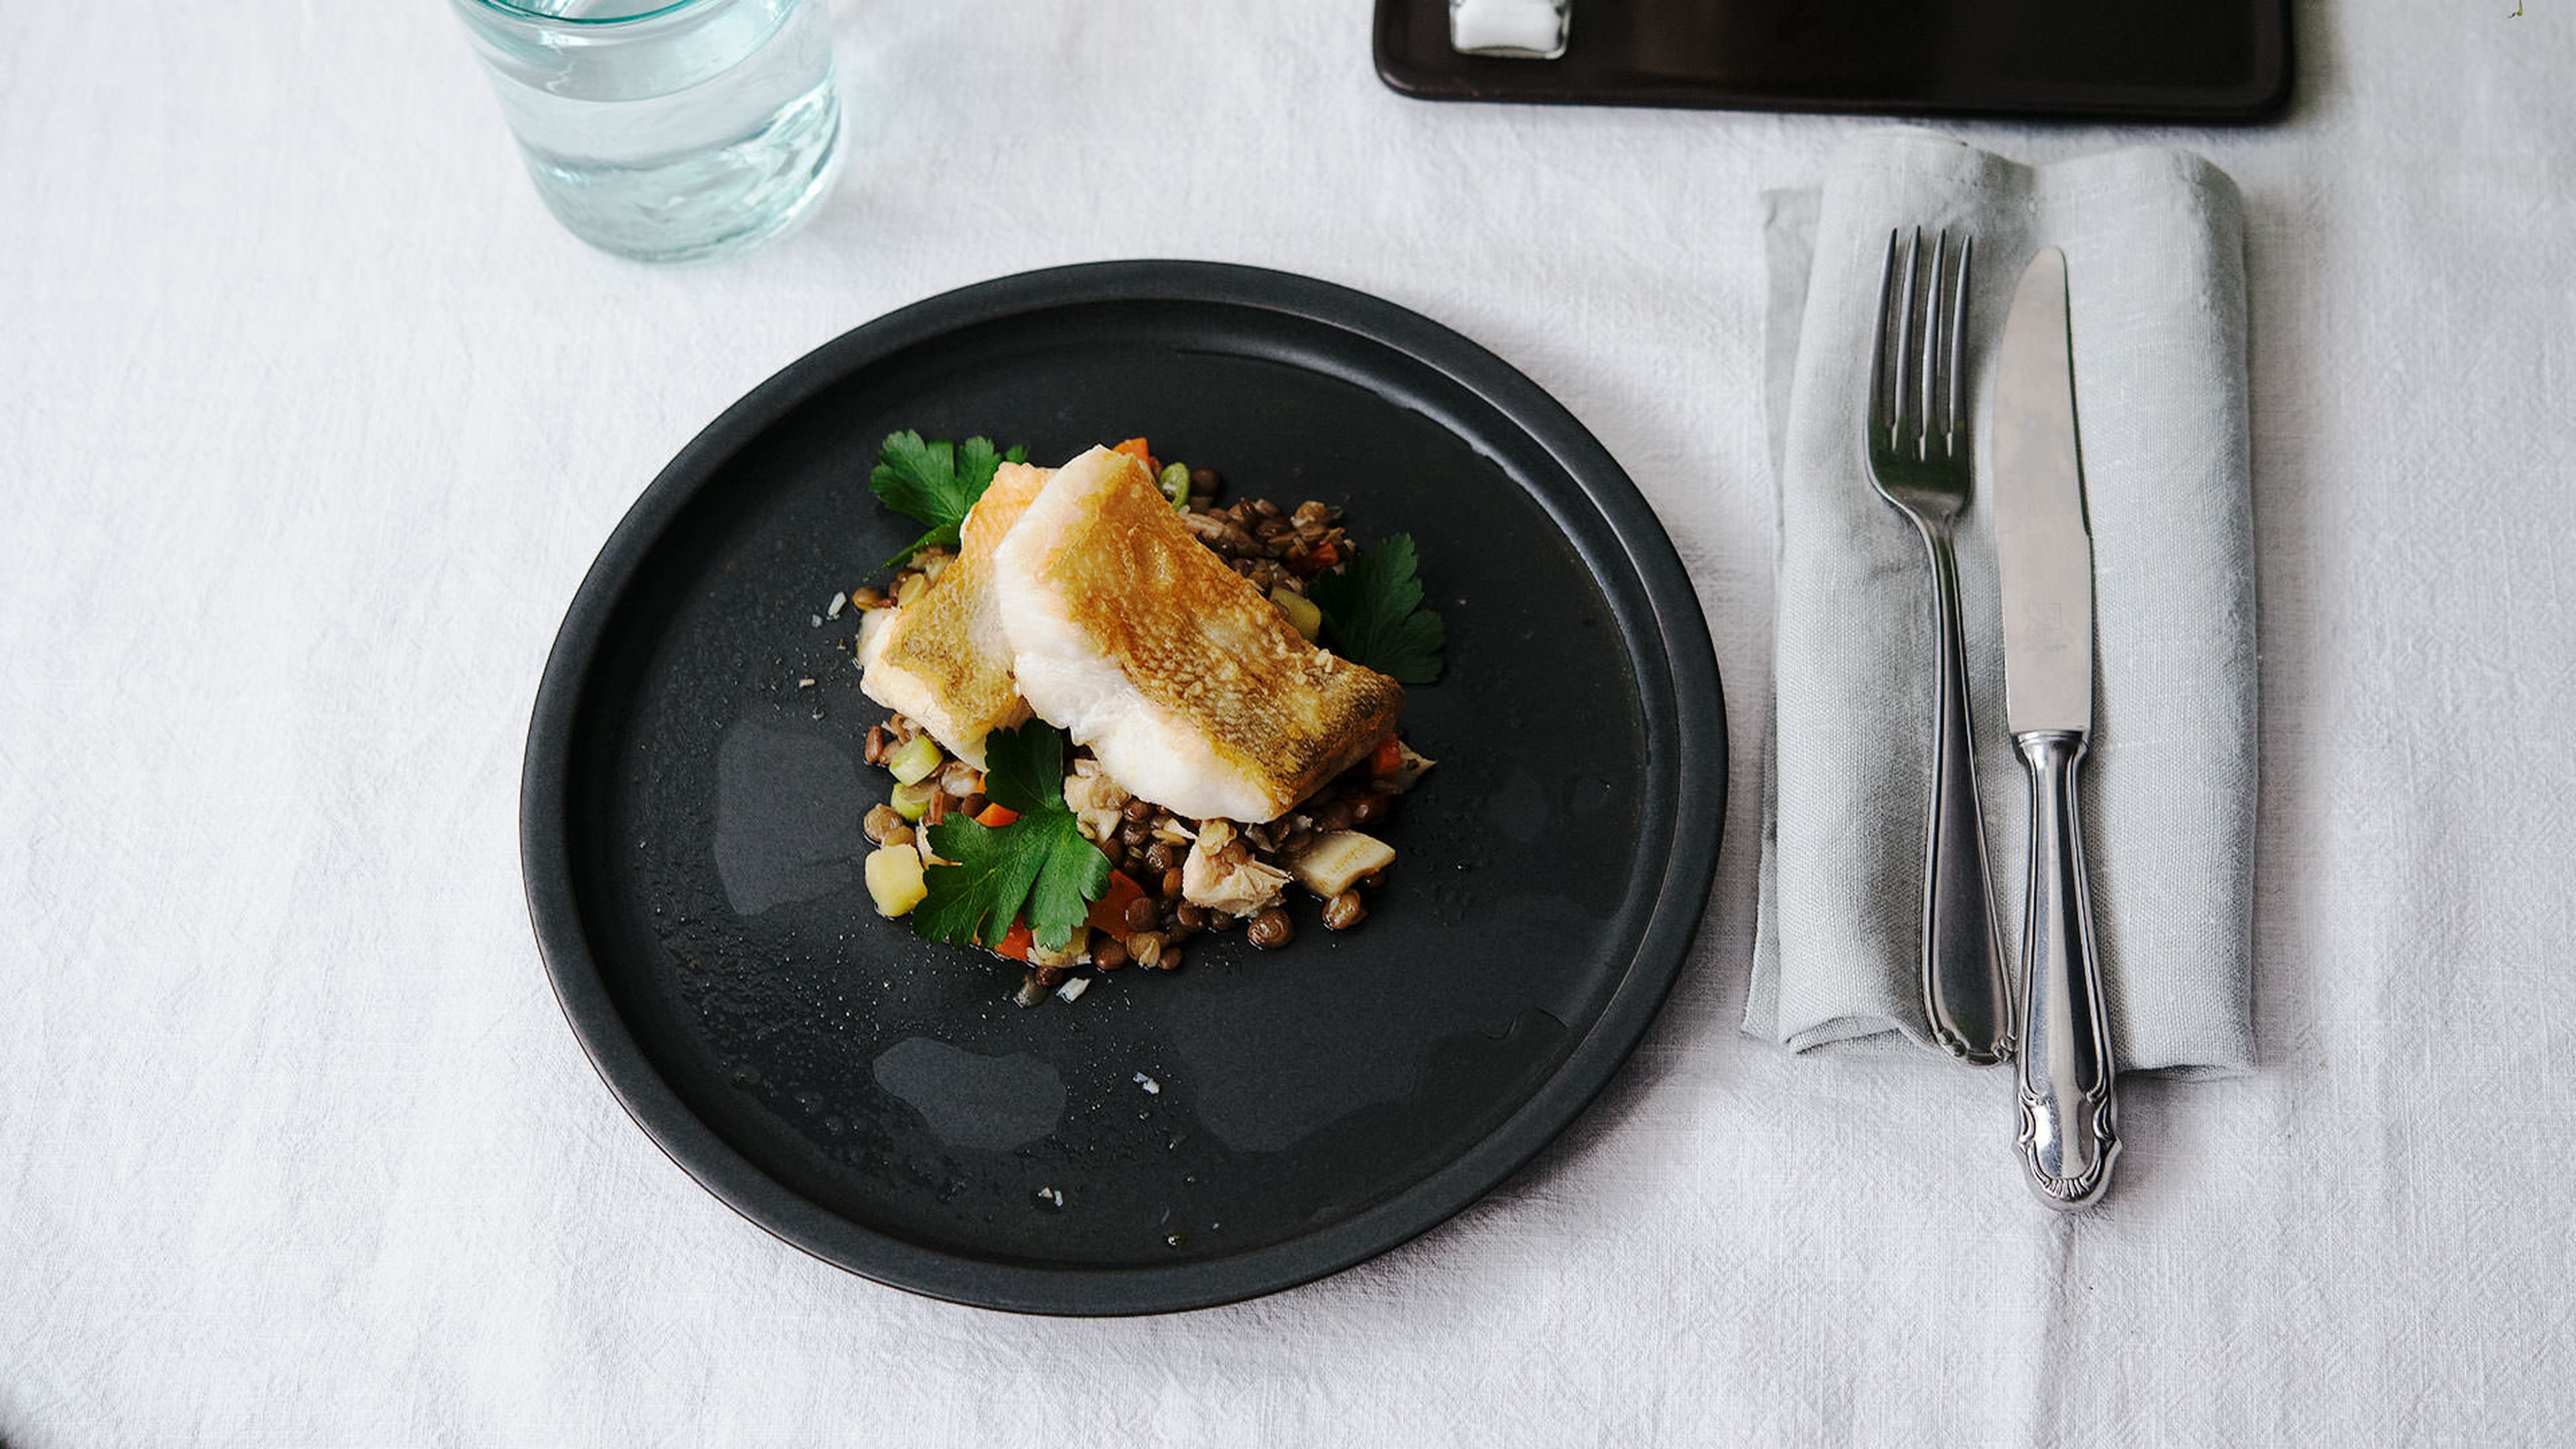 Pan-fried pike perch over lentil salad